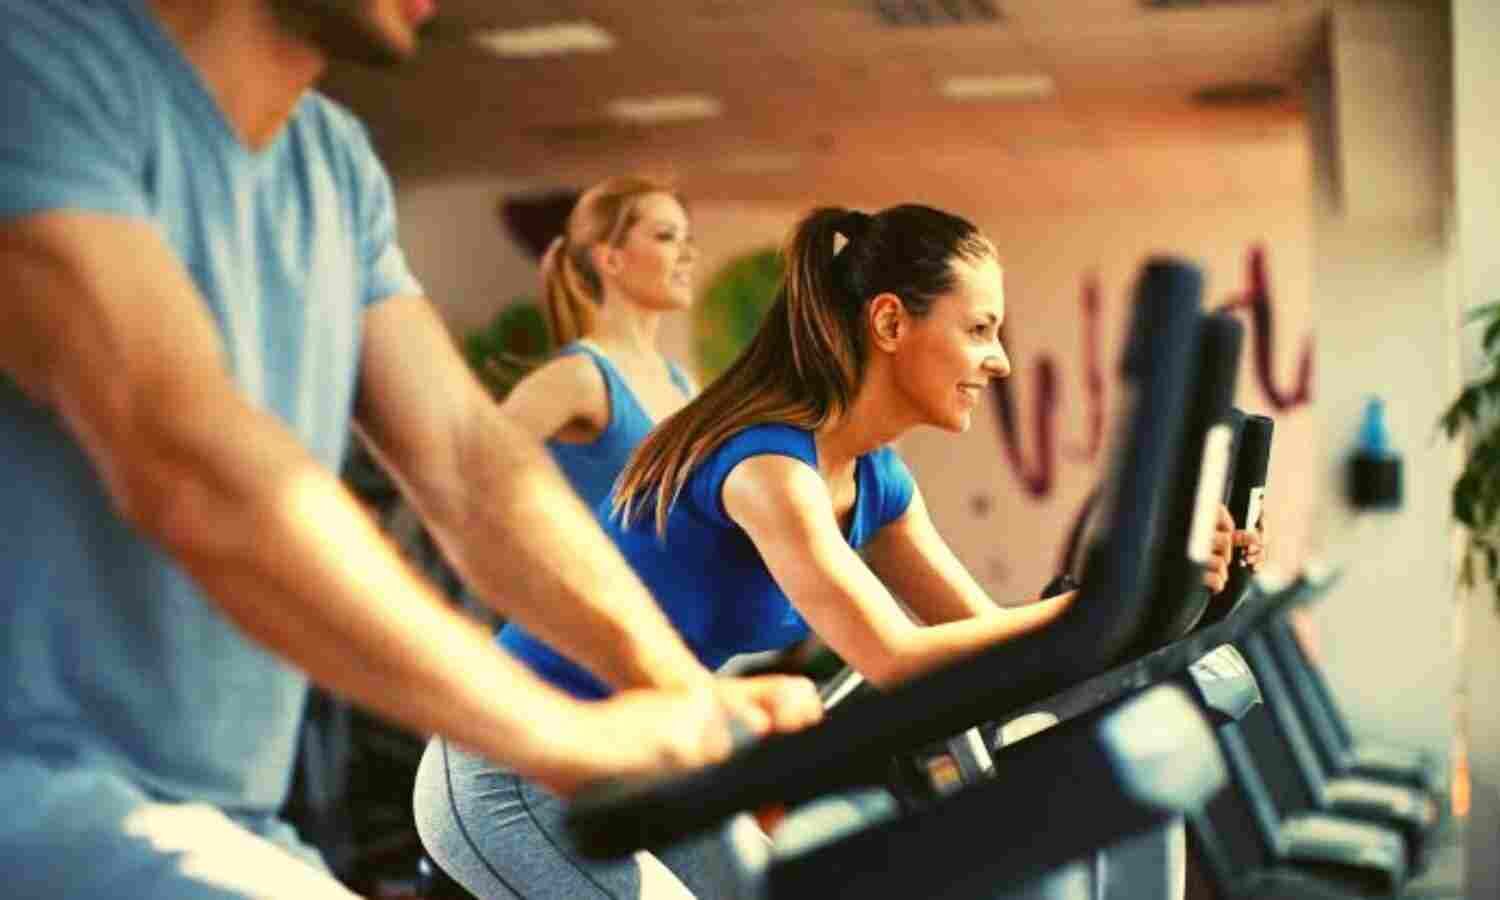 Exercise for Diabetes:: This is the best time to exercise to control diabetes.